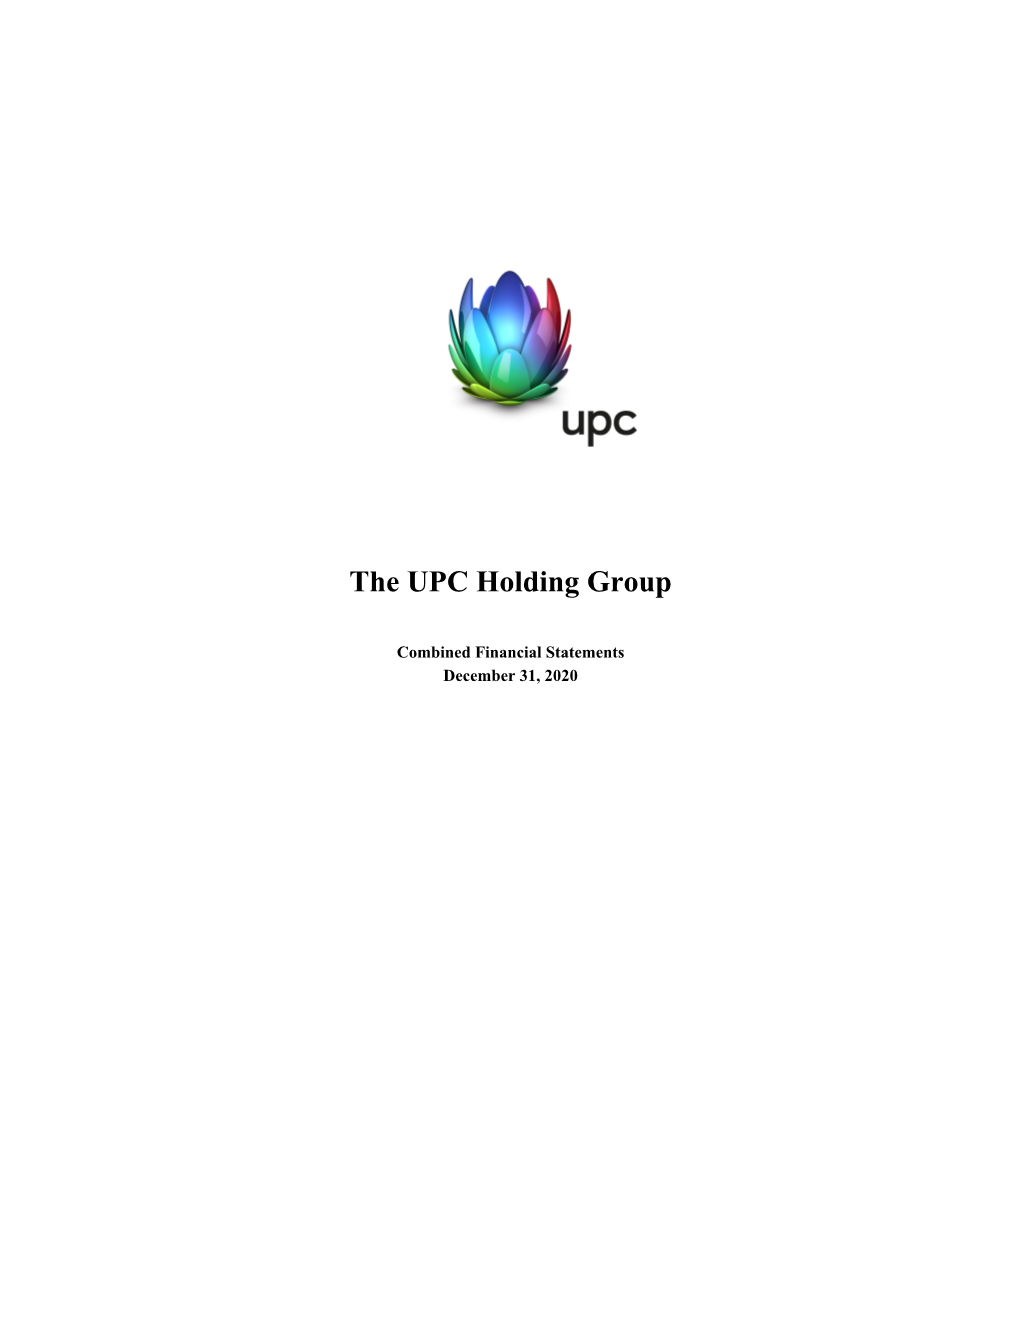 The UPC Holding Group